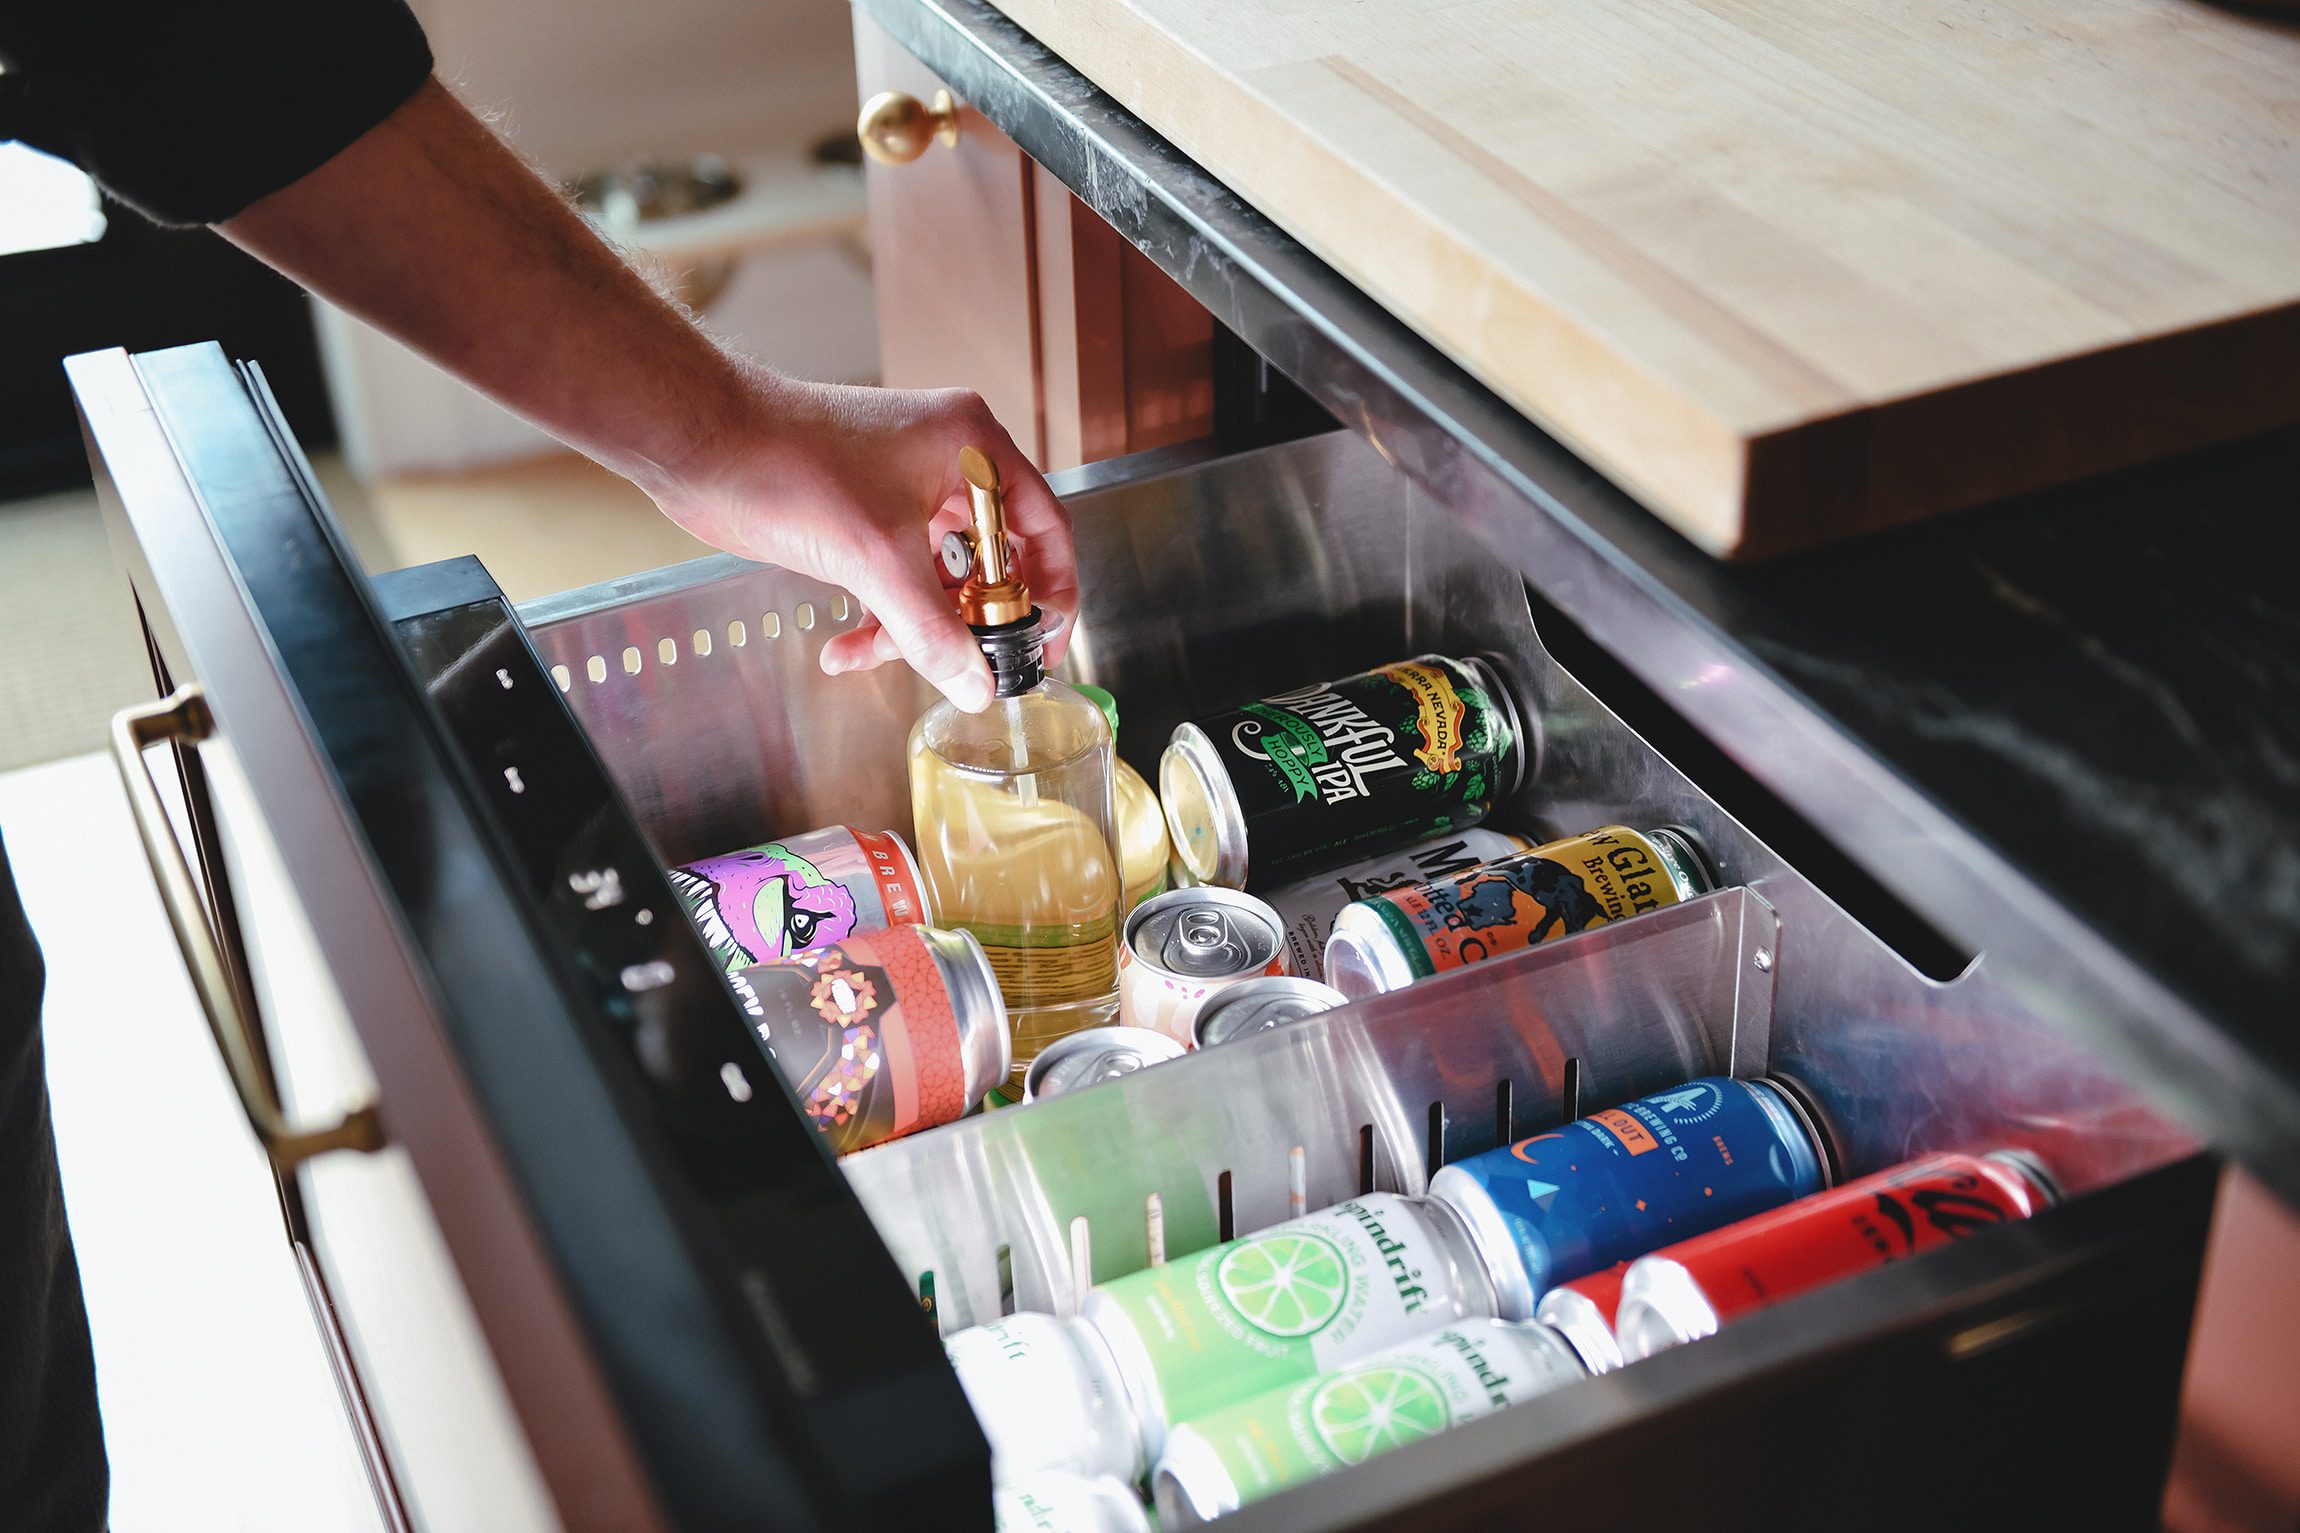 The beverage fridge gets the job done, but not without some quirks // via Yellow Brick Home